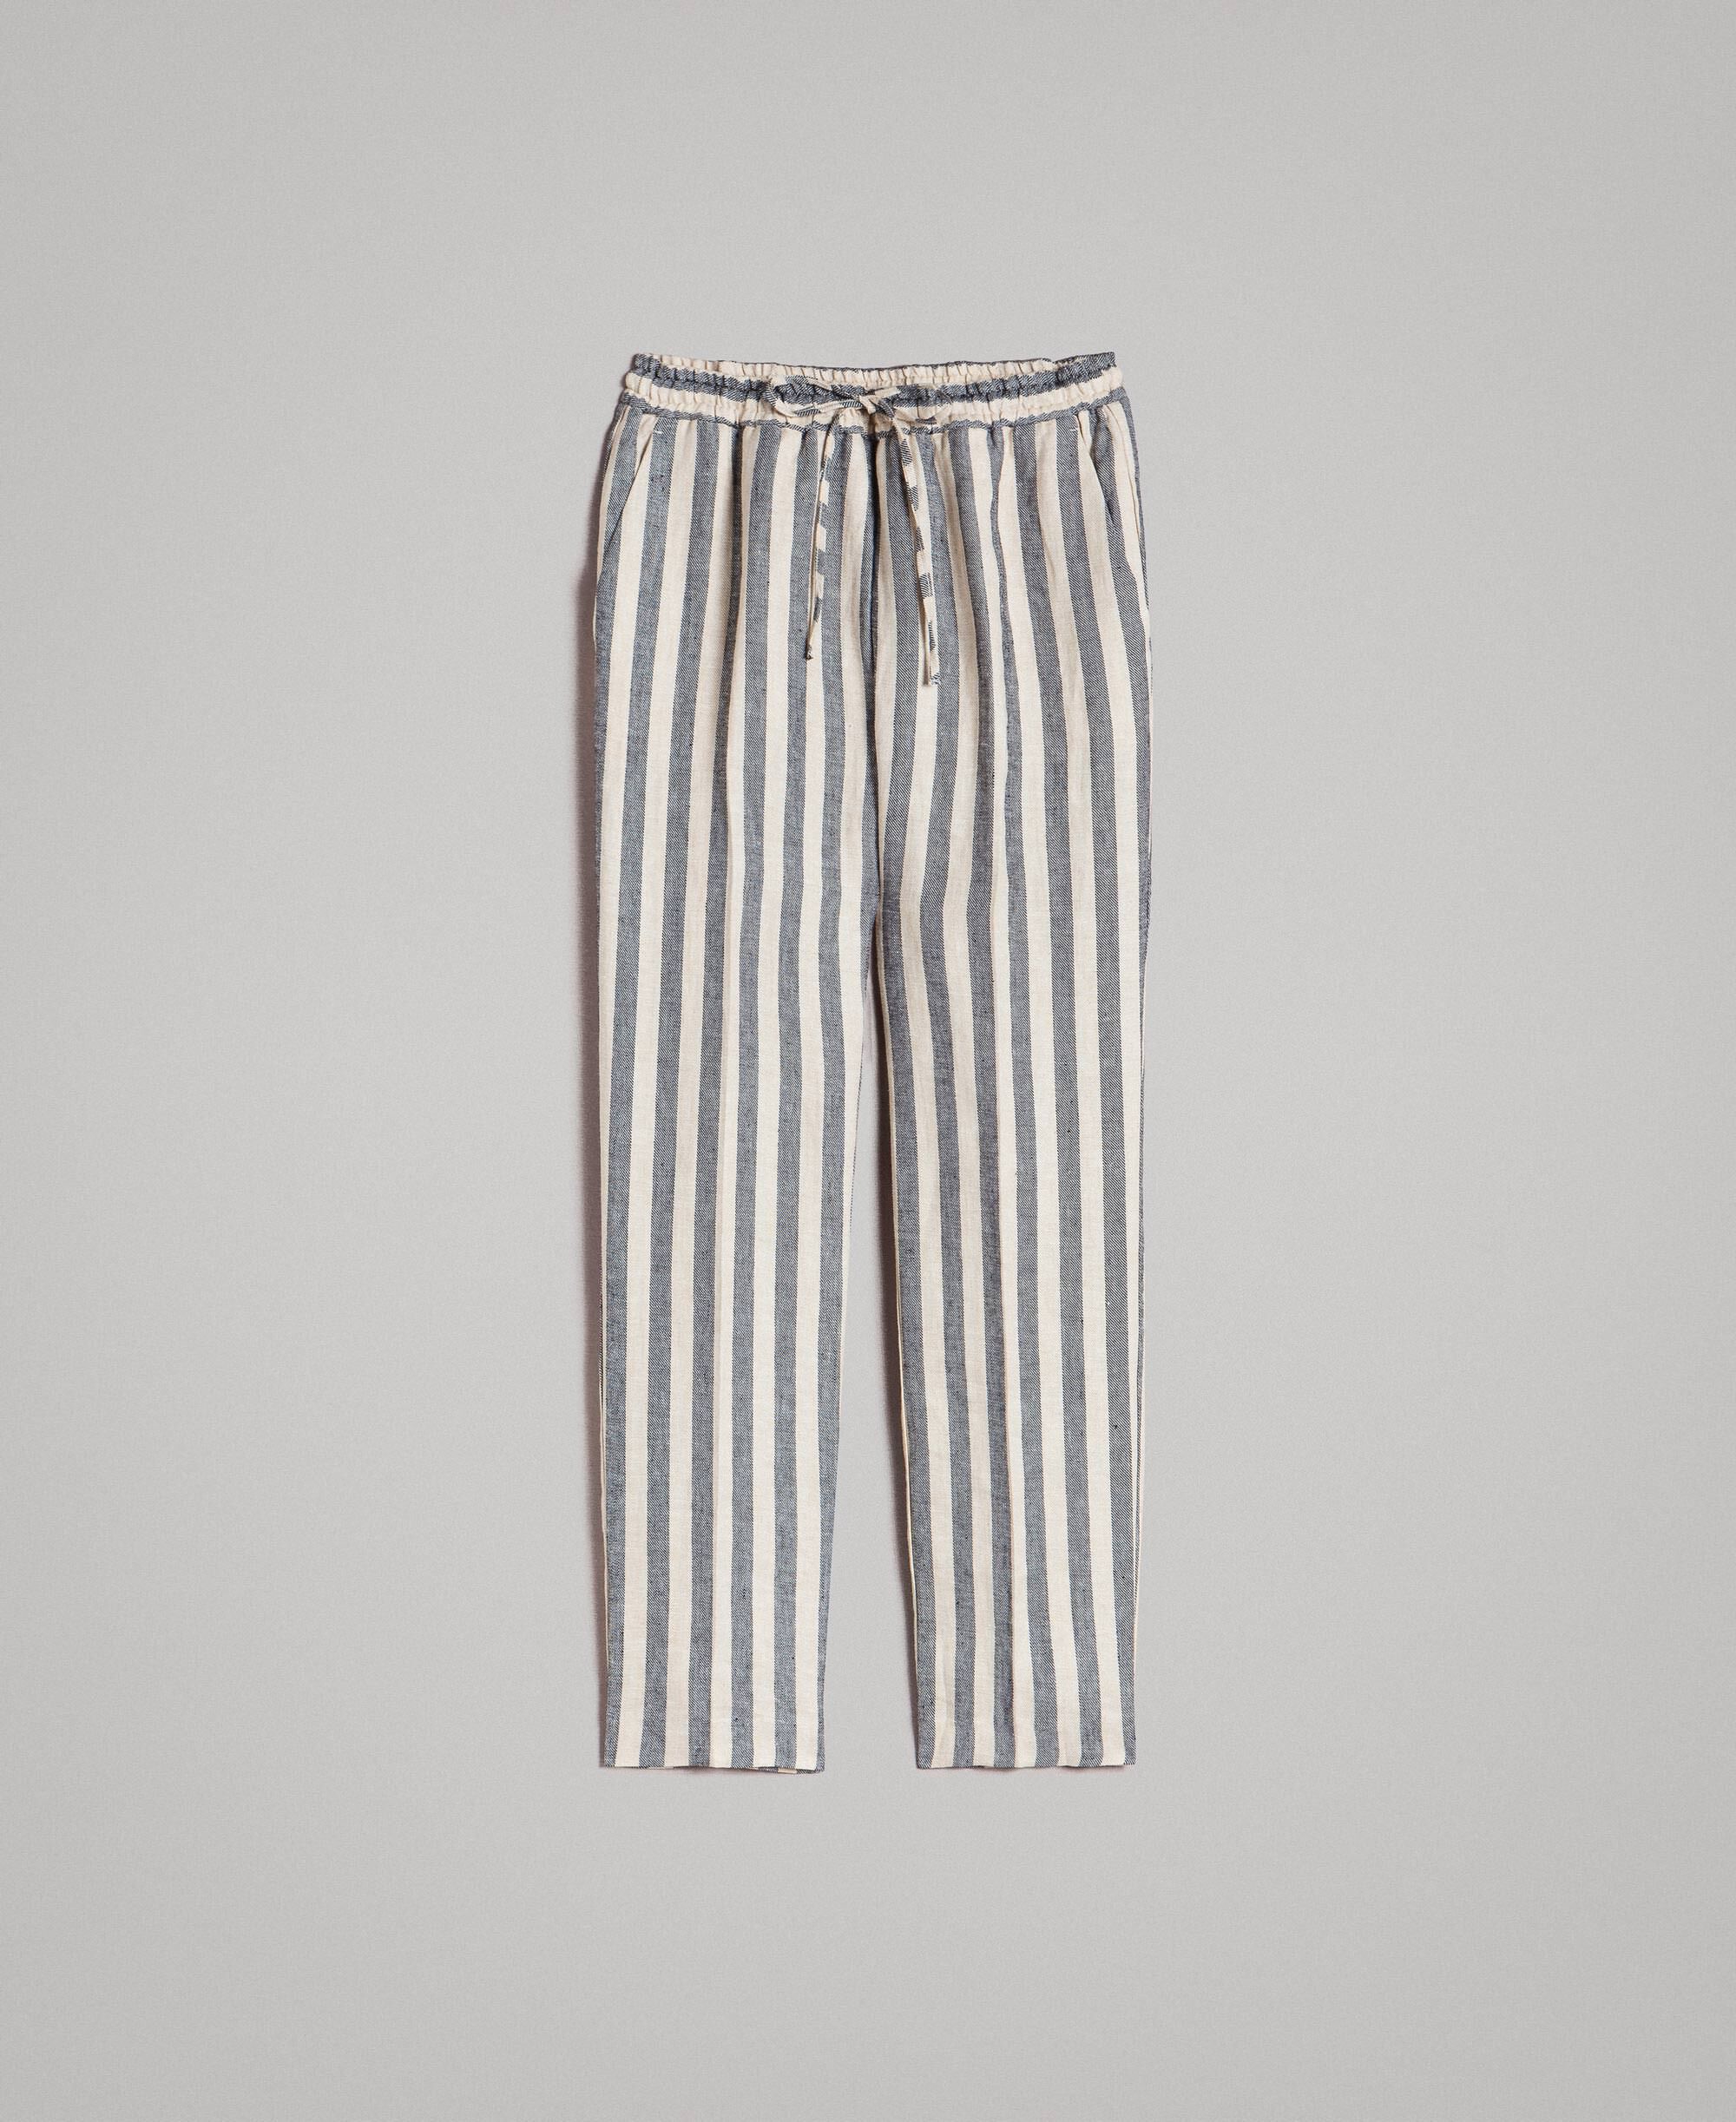 black and white striped linen pants